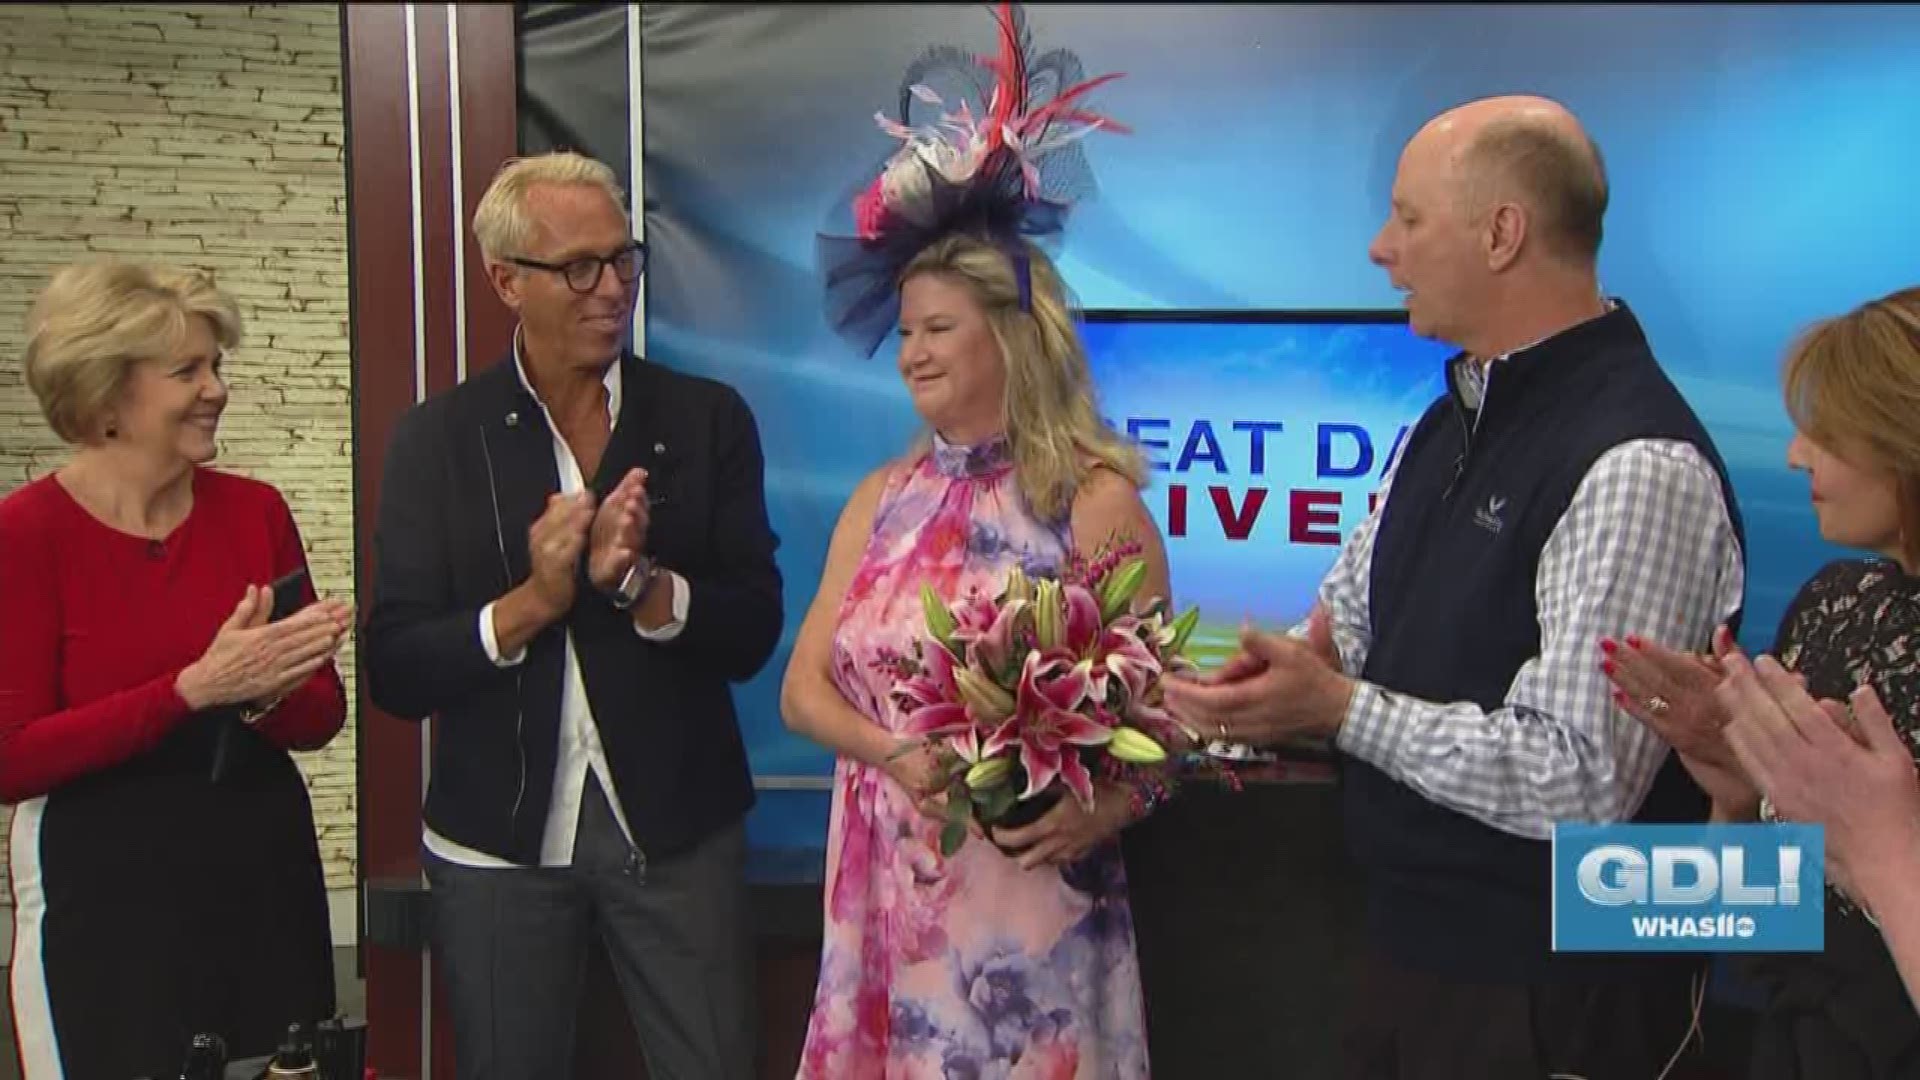 Make up artists to the stars Tim Quinn does a live makeover for cancer survivor Dr. Michelle Palazzo.